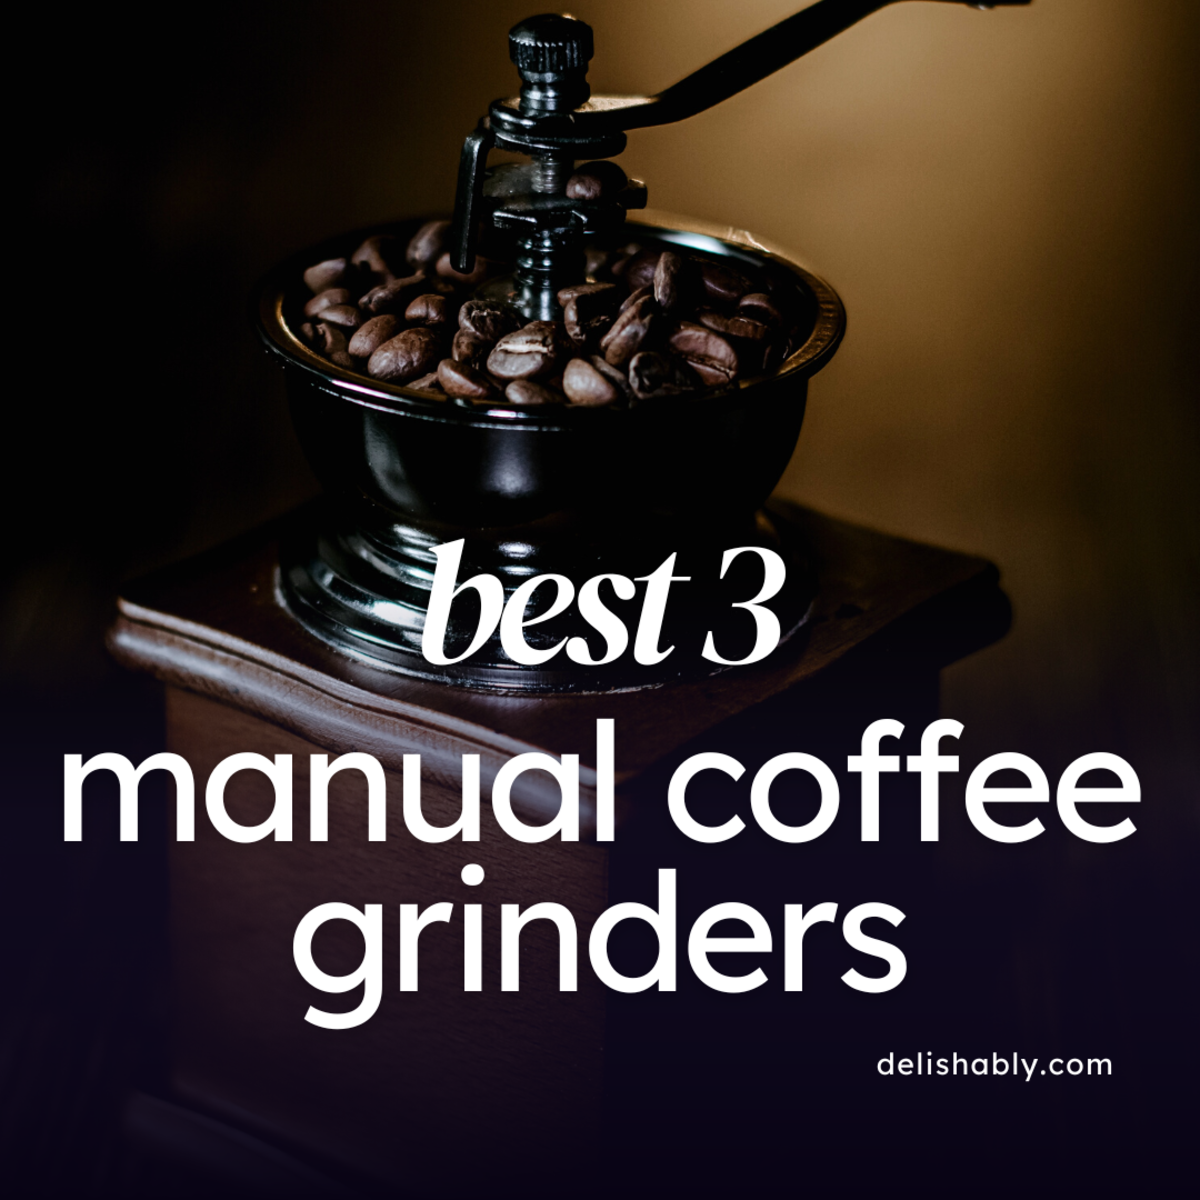 https://images.saymedia-content.com/.image/t_share/MTk2MTEwOTY3MzI1NTk5MjY1/5-best-manual-coffee-grinders.png